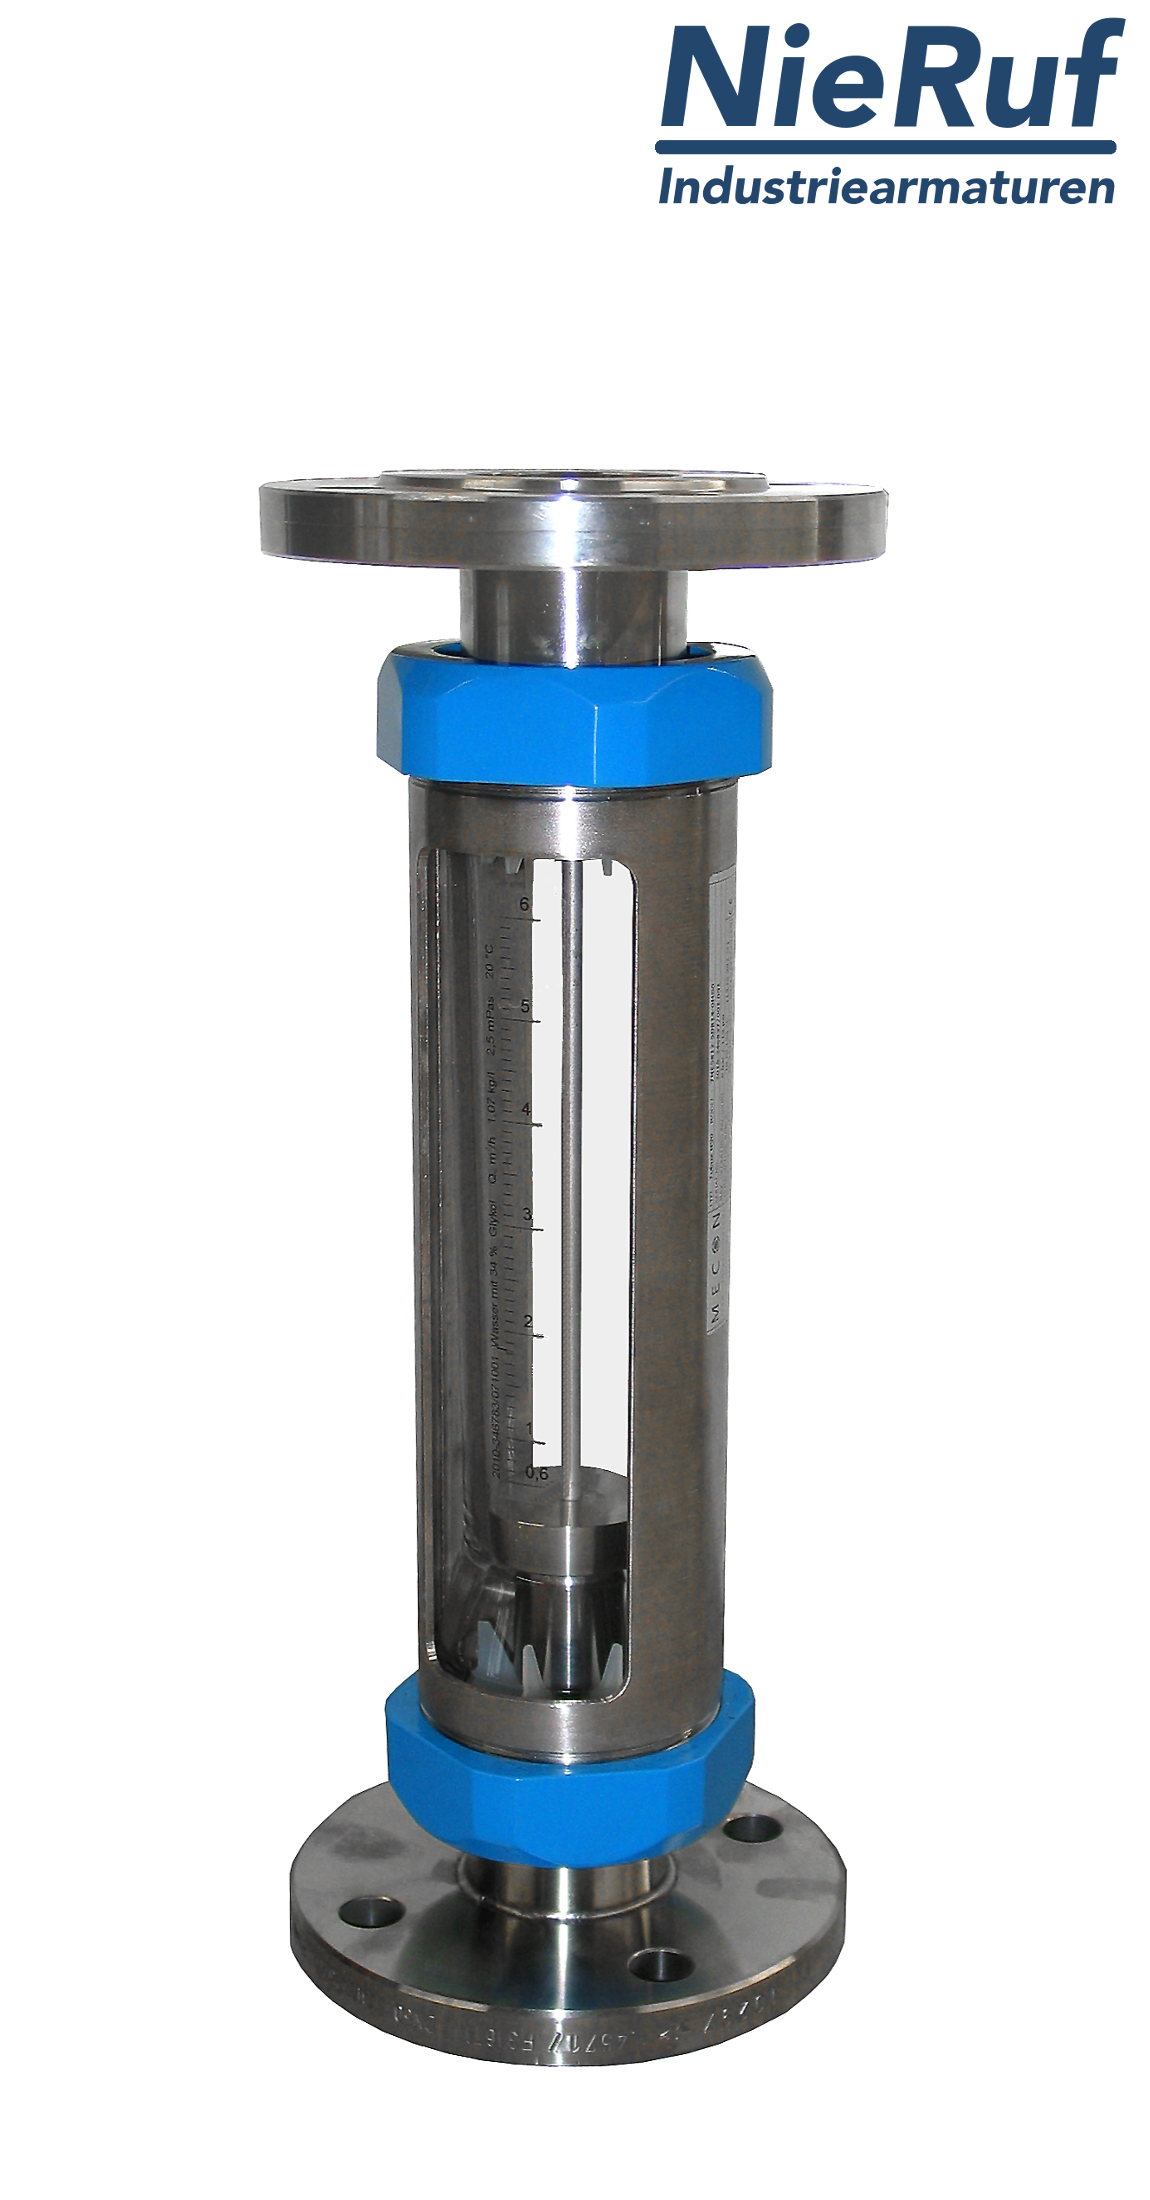 Variable area flowmeter stainless steel + borosilicate flange DN20 12.5 - 125.0 l/h water FKM